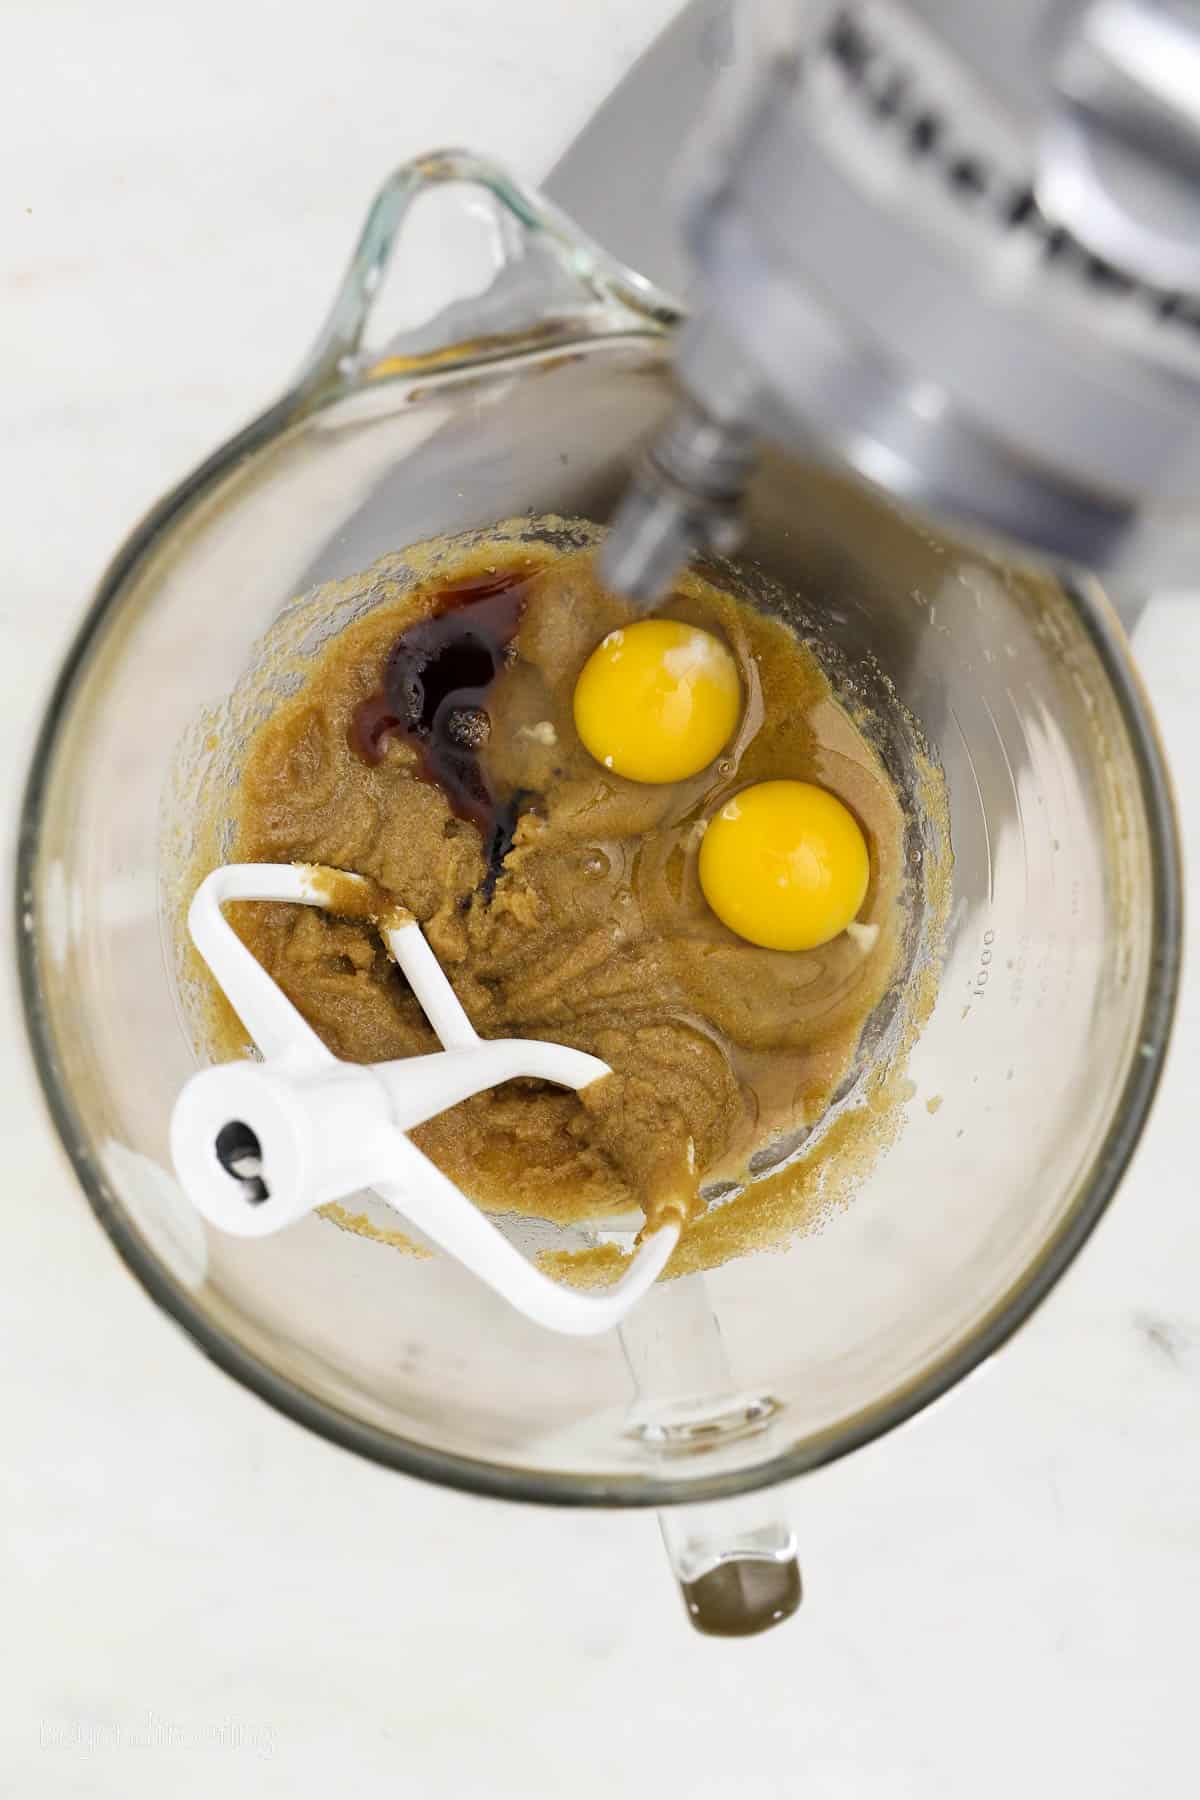 Eggs added to wet blondie batter in a mixing bowl with a stand mixer attachment.